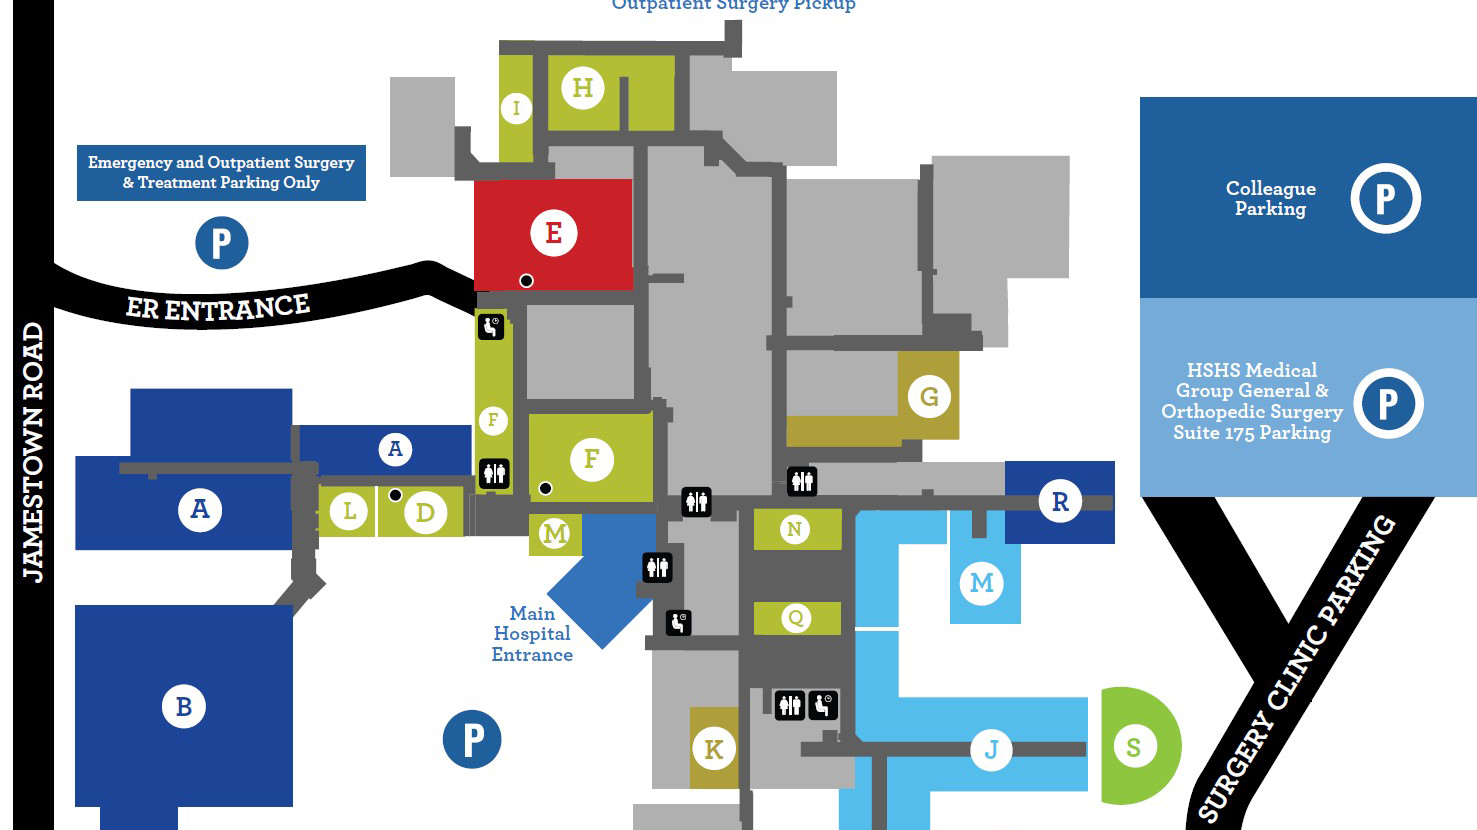 Image of campus map